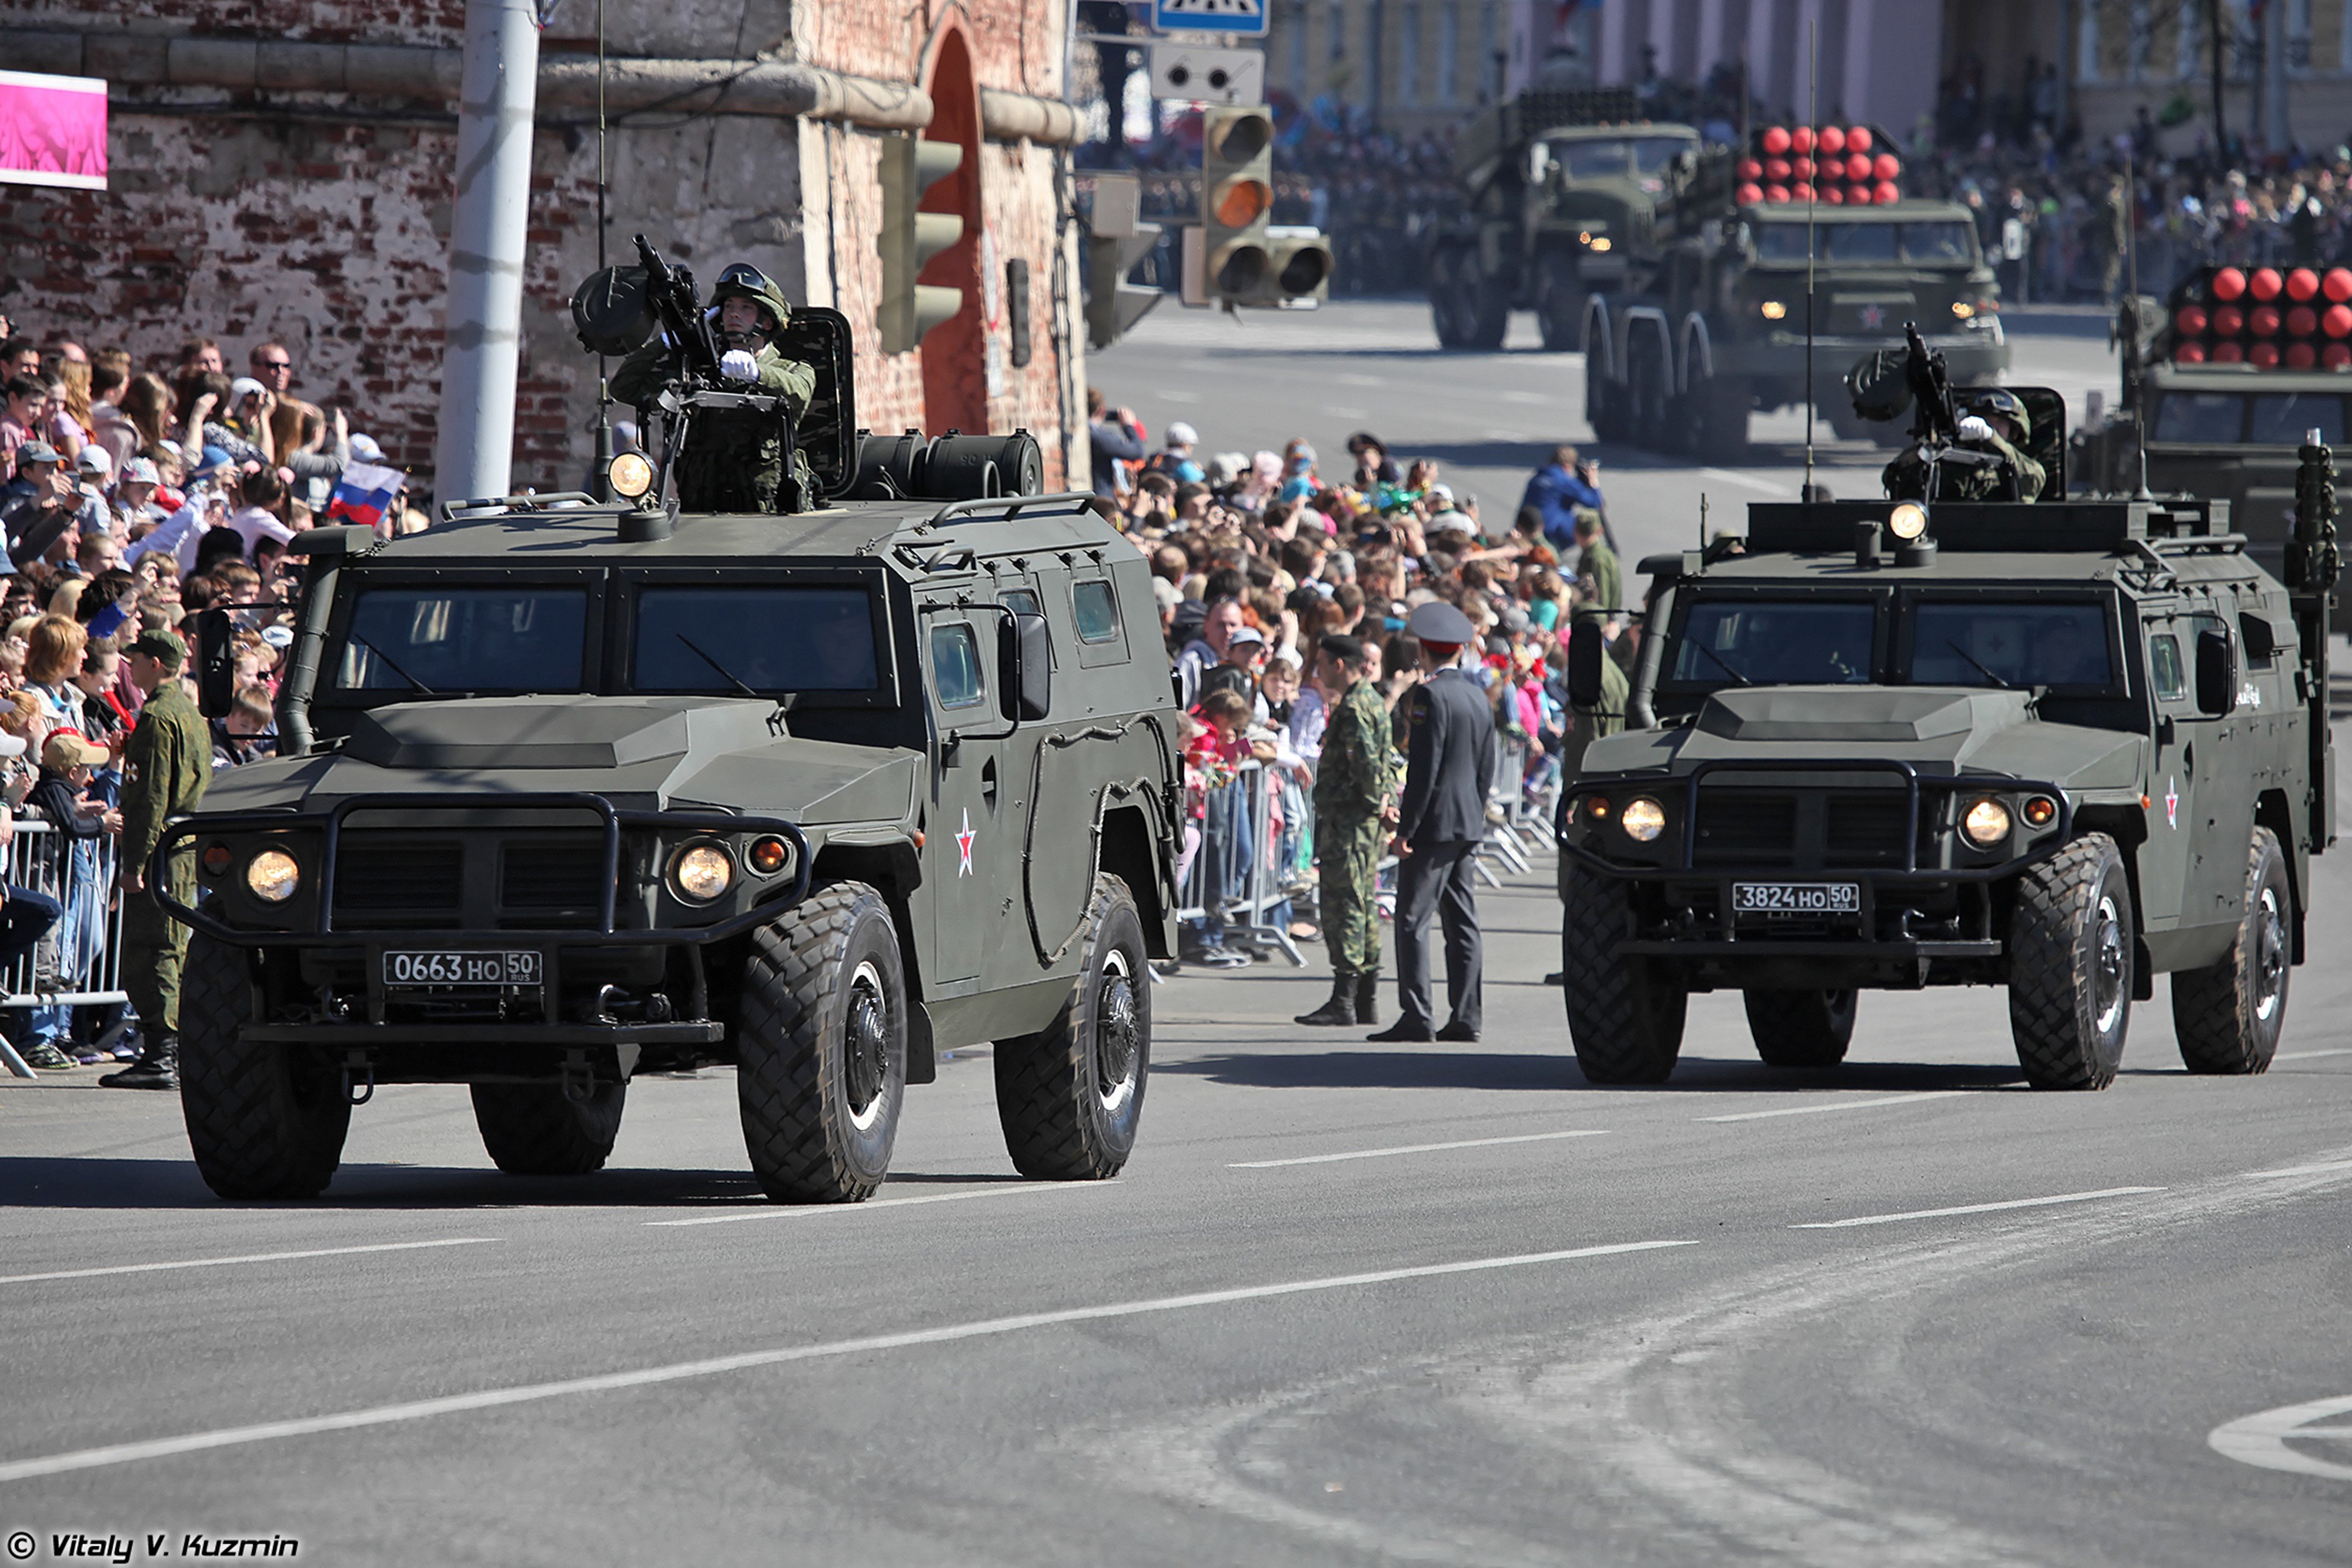 2014, Victory, Day, Parade in nizhny novgorod, Russia, Military, Russian, Army, Red star, Amn, 233114, Tigr m, Armored, Vehicle, 4000x2667 Wallpaper